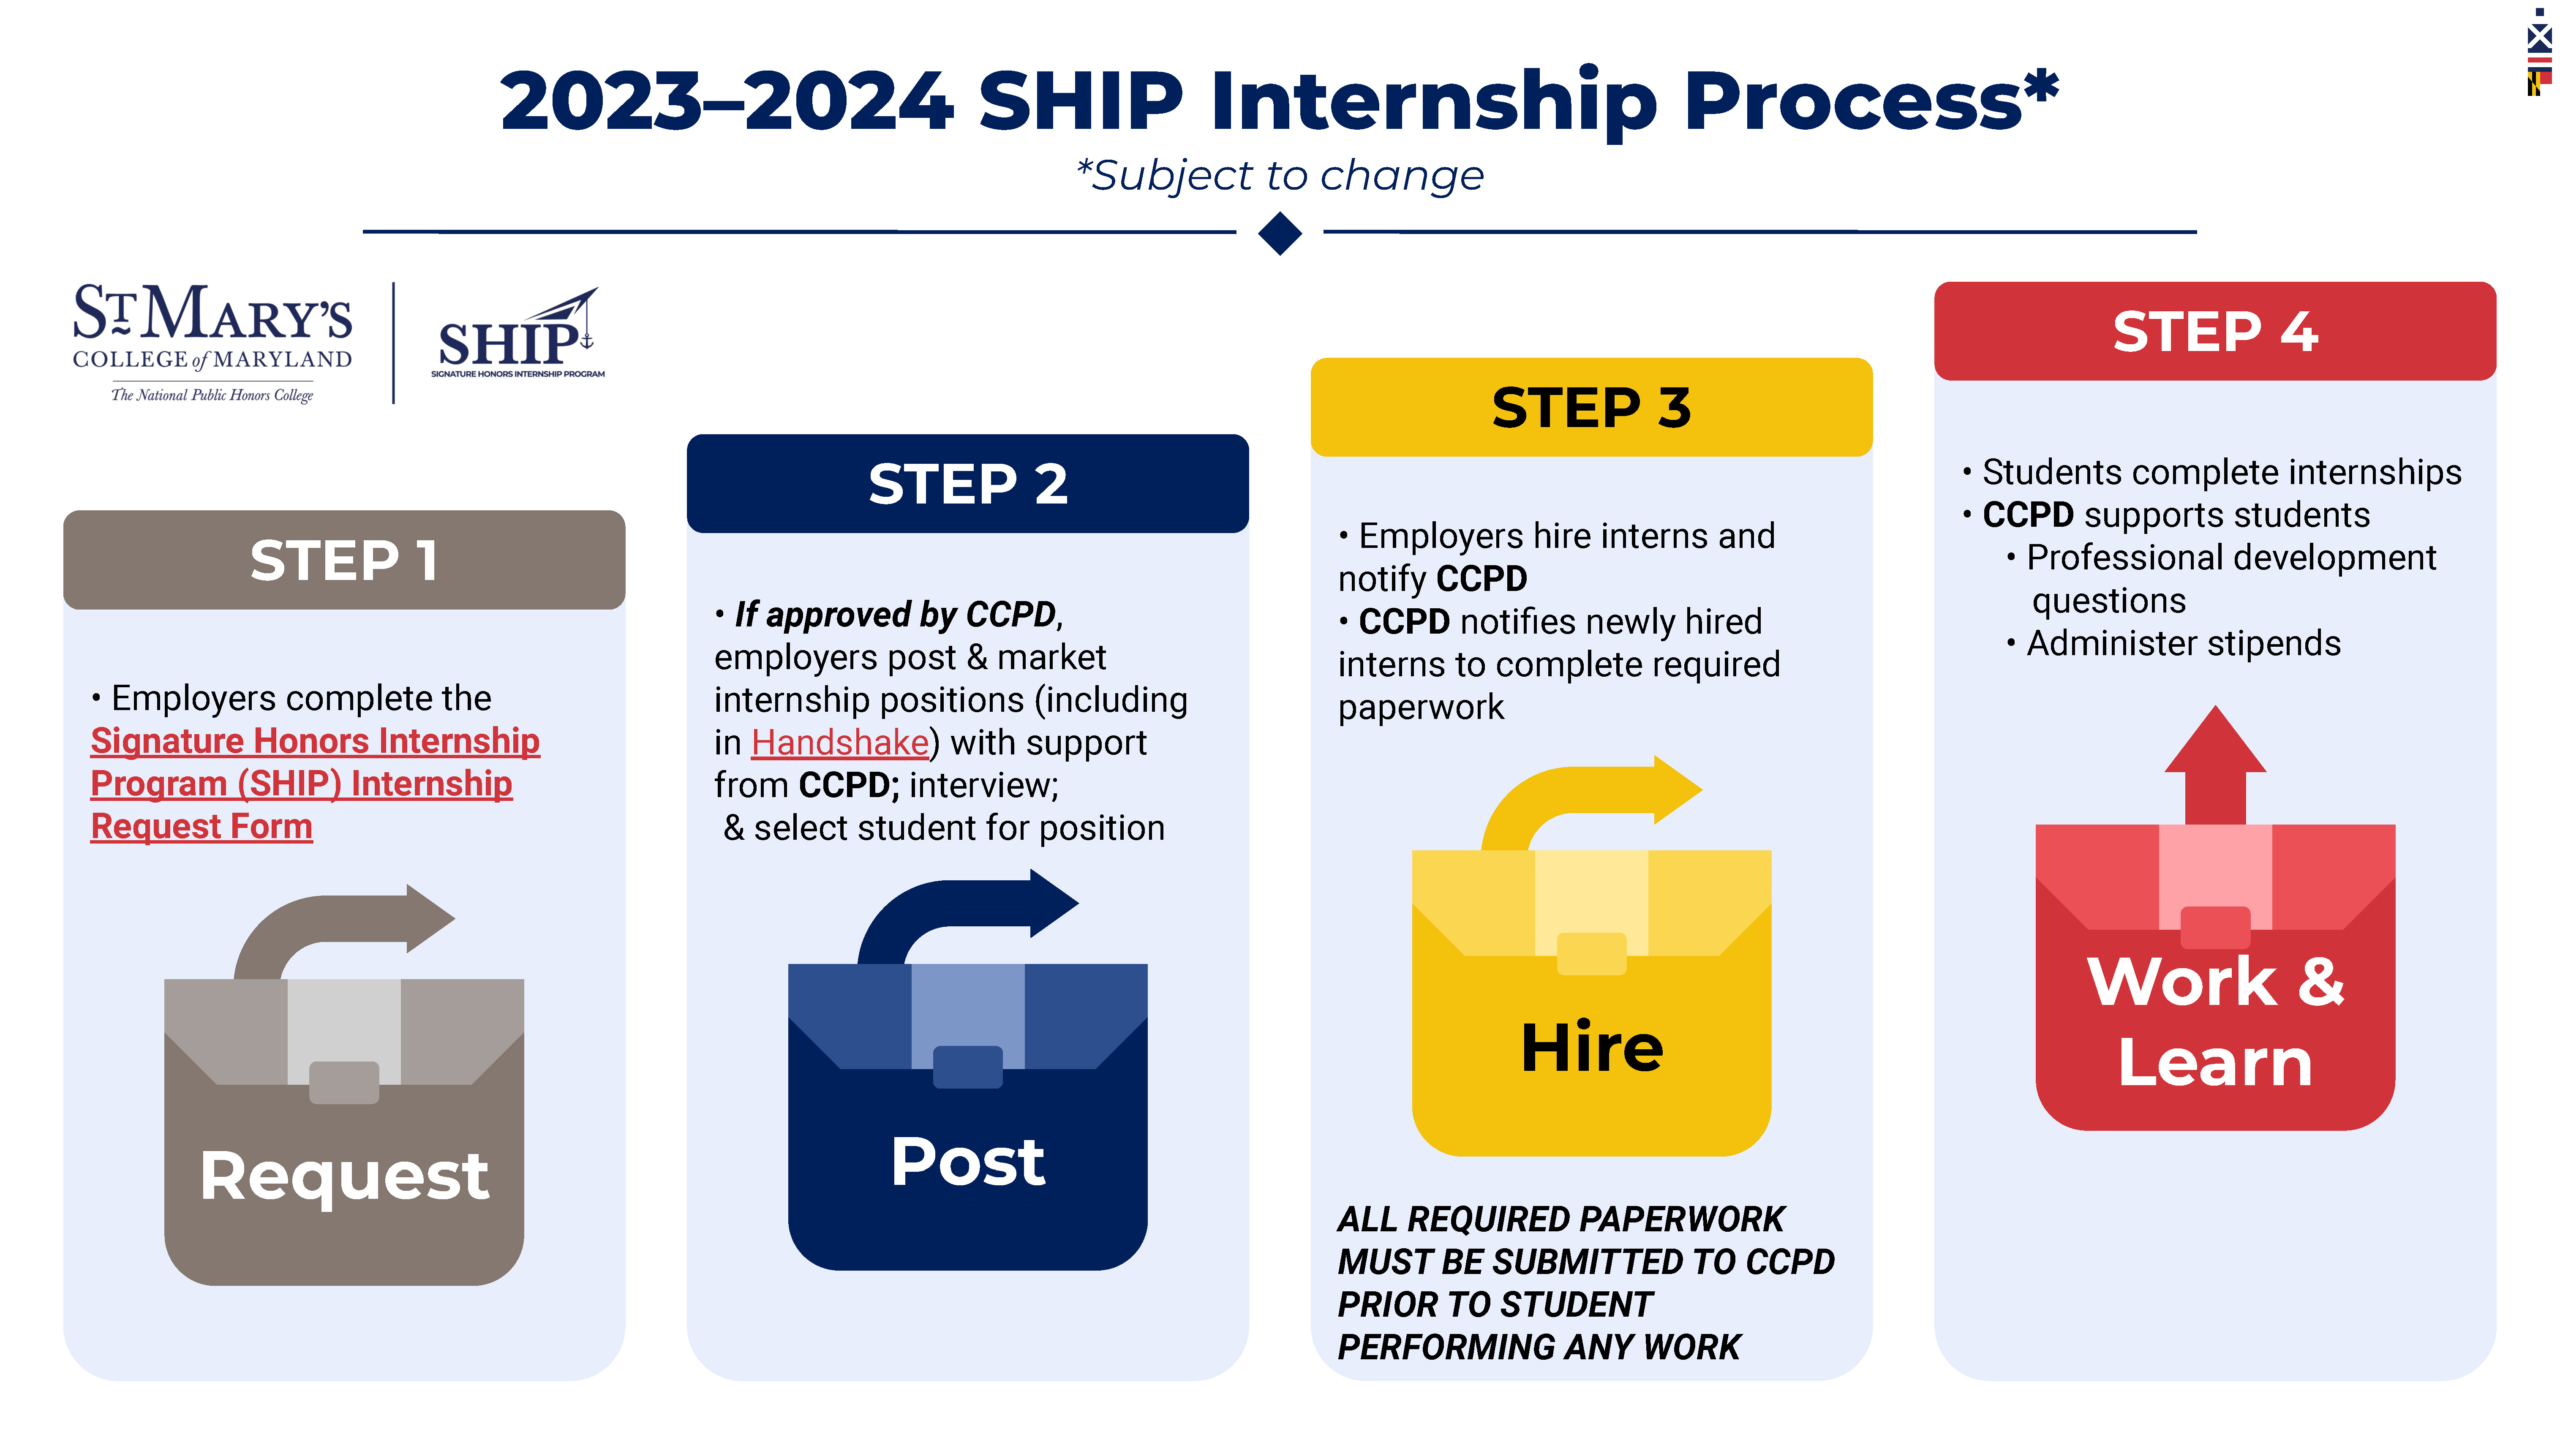 Graphic illustrating the 2023–2024 SHIP Internship Process, which mirrors the information given in the text above. STEP 1: Request. Employers complete the Signature Honors Internship Program (SHIP) Internship Request Form. STEP 2: Post. If approved by CCPD, employers post & market internship positions (including in Handshake) with support from CCPD; interview; & select students for position. STEP 3: Hire. Employers hire interns and notify CCPD. CCPD notifies newly hired interns to complete required paperwork. All required paperwork must be submitted to CCPD prior to students performing any work. STEP 4: Work & Learn. Students complete internships. CCPD supports students with professional development questions and administers stipends.